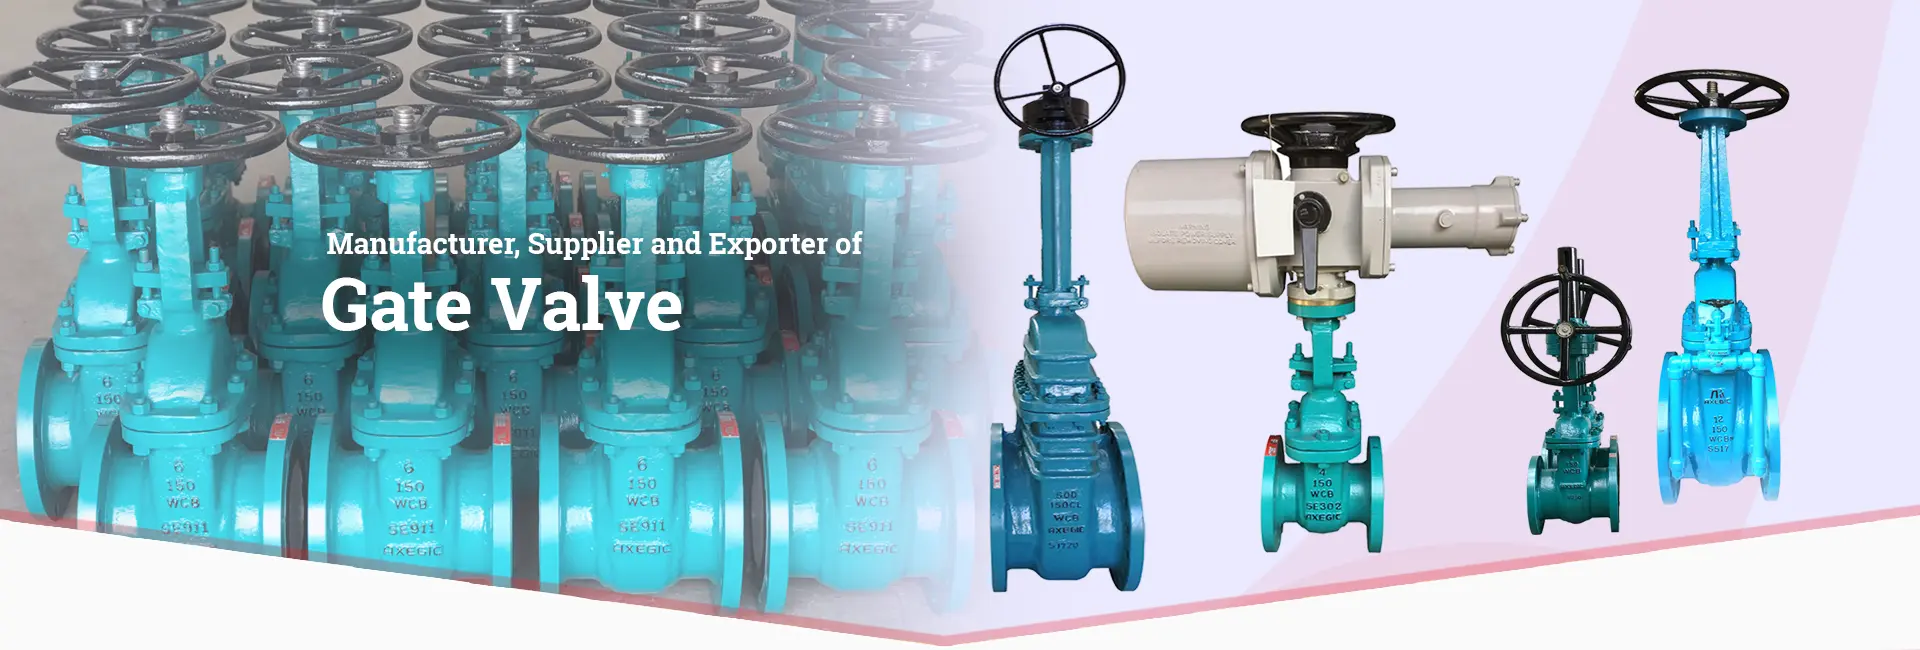 Gate Valve Exporter and Manufacturer in India